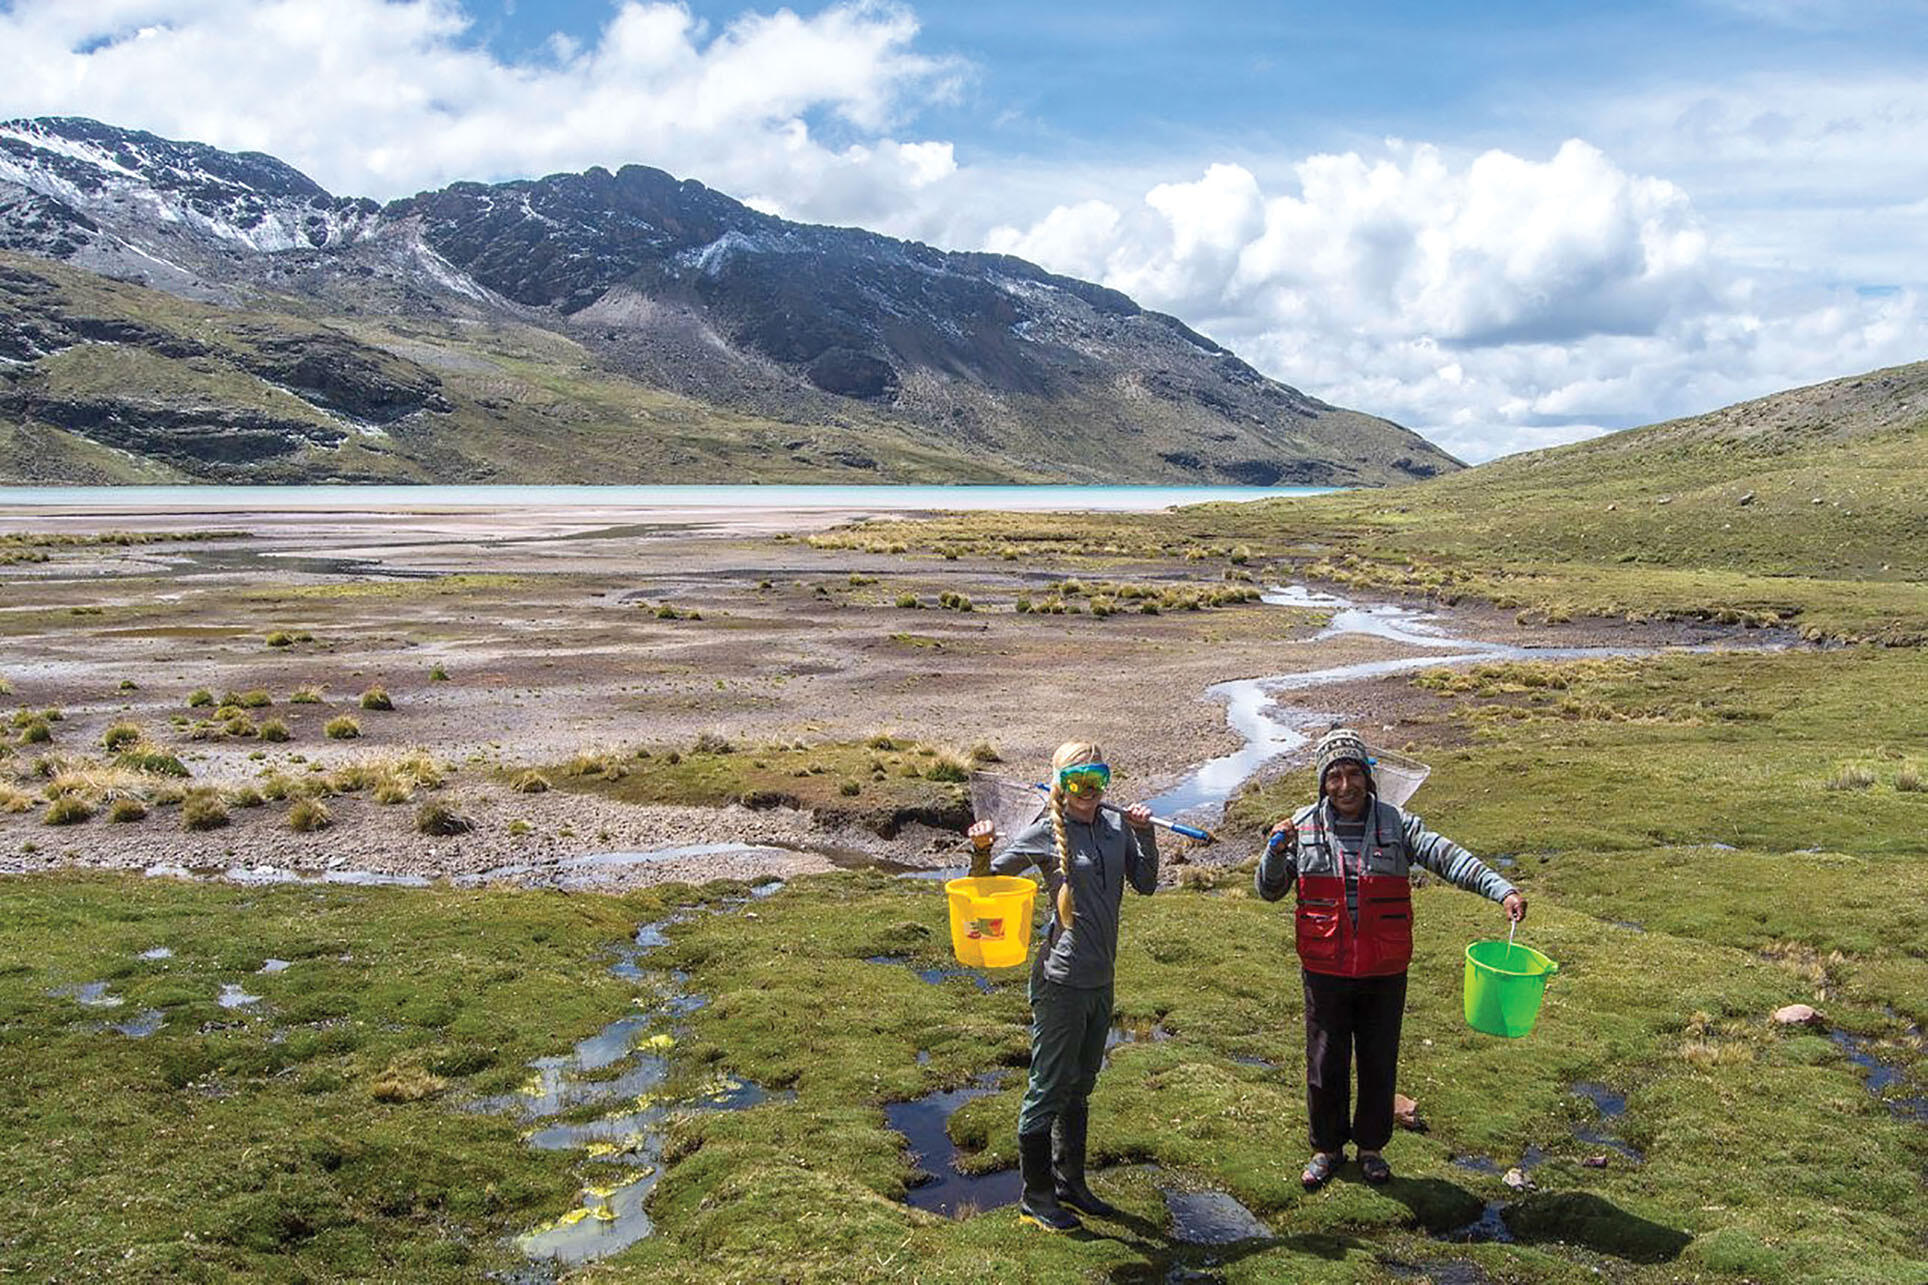 Emma Steigerwald and research assistant Gumercindo collecting samples of frogs high in the Andes, March 2018. (Photo courtesy of Emma Steigerwald.)